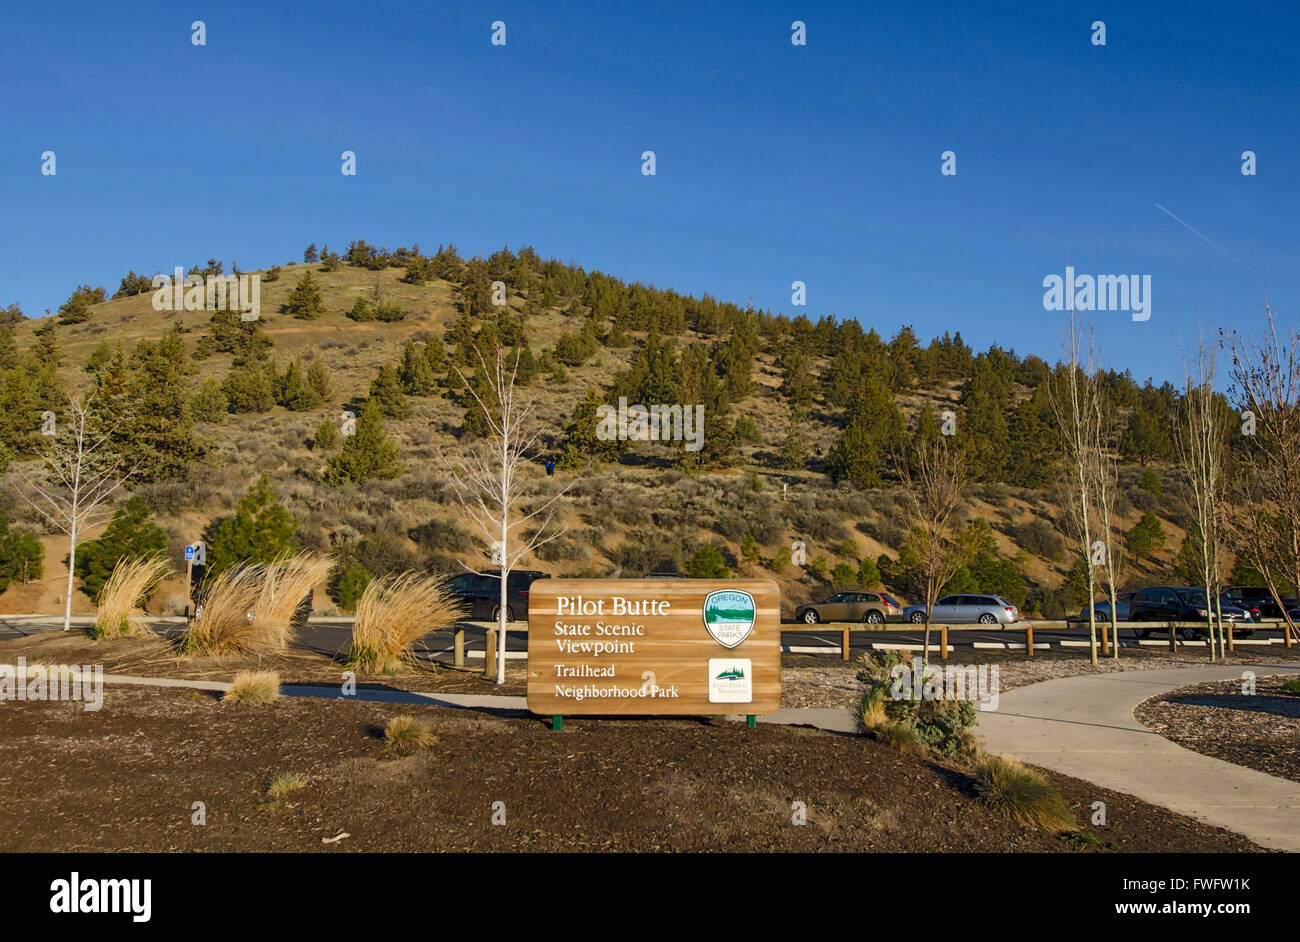 Pilot Butte State Scenic Viewpoint in Bend, Oregon Stock Photo